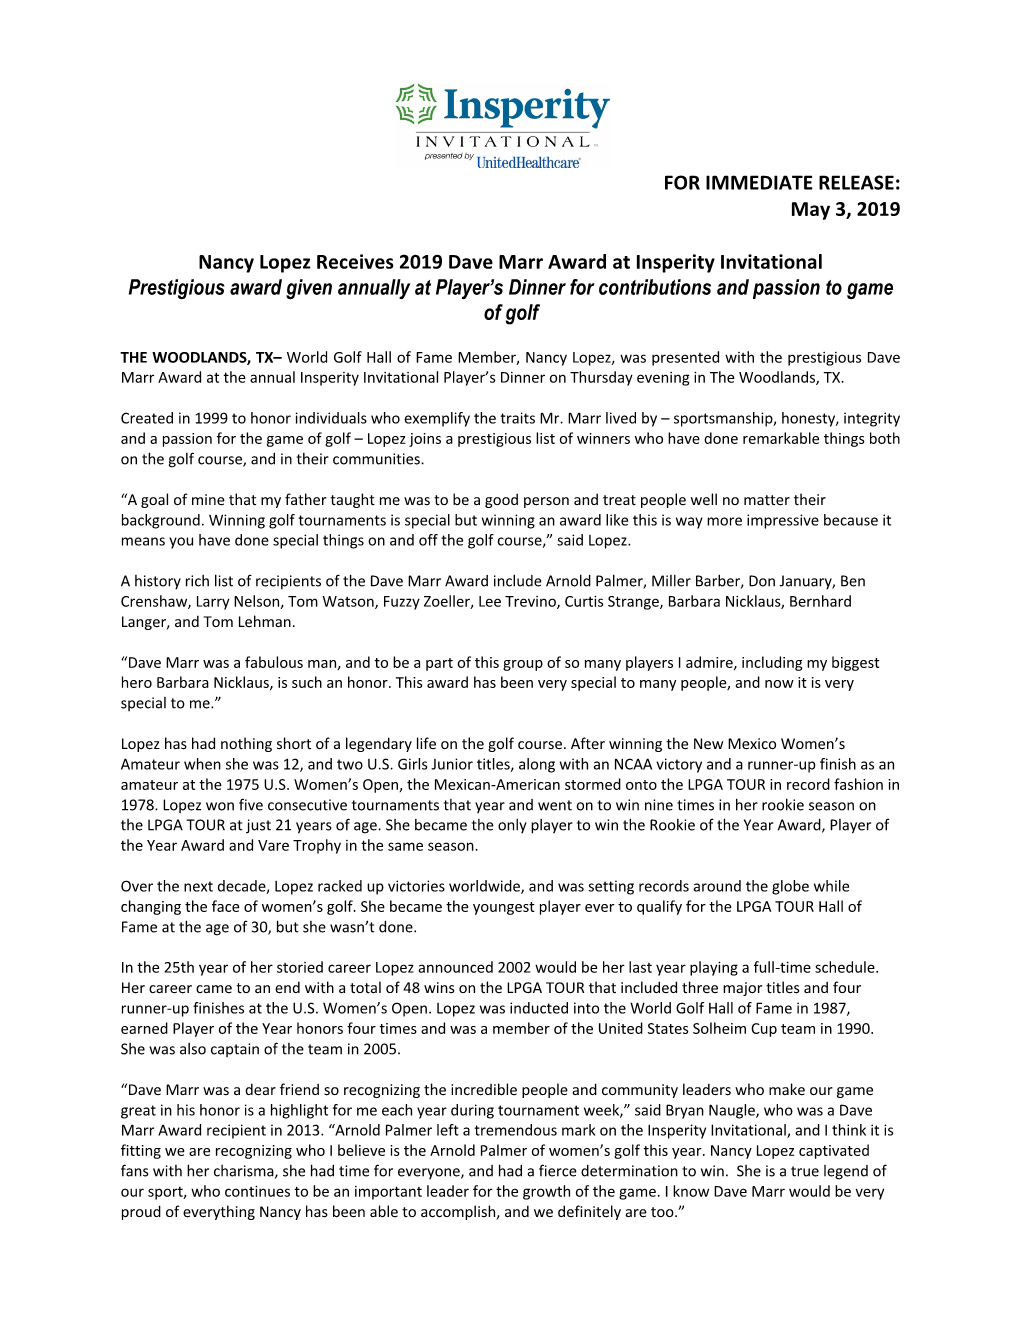 FOR IMMEDIATE RELEASE: May 3, 2019 Nancy Lopez Receives 2019 Dave Marr Award at Insperity Invitational Prestigious Award Given